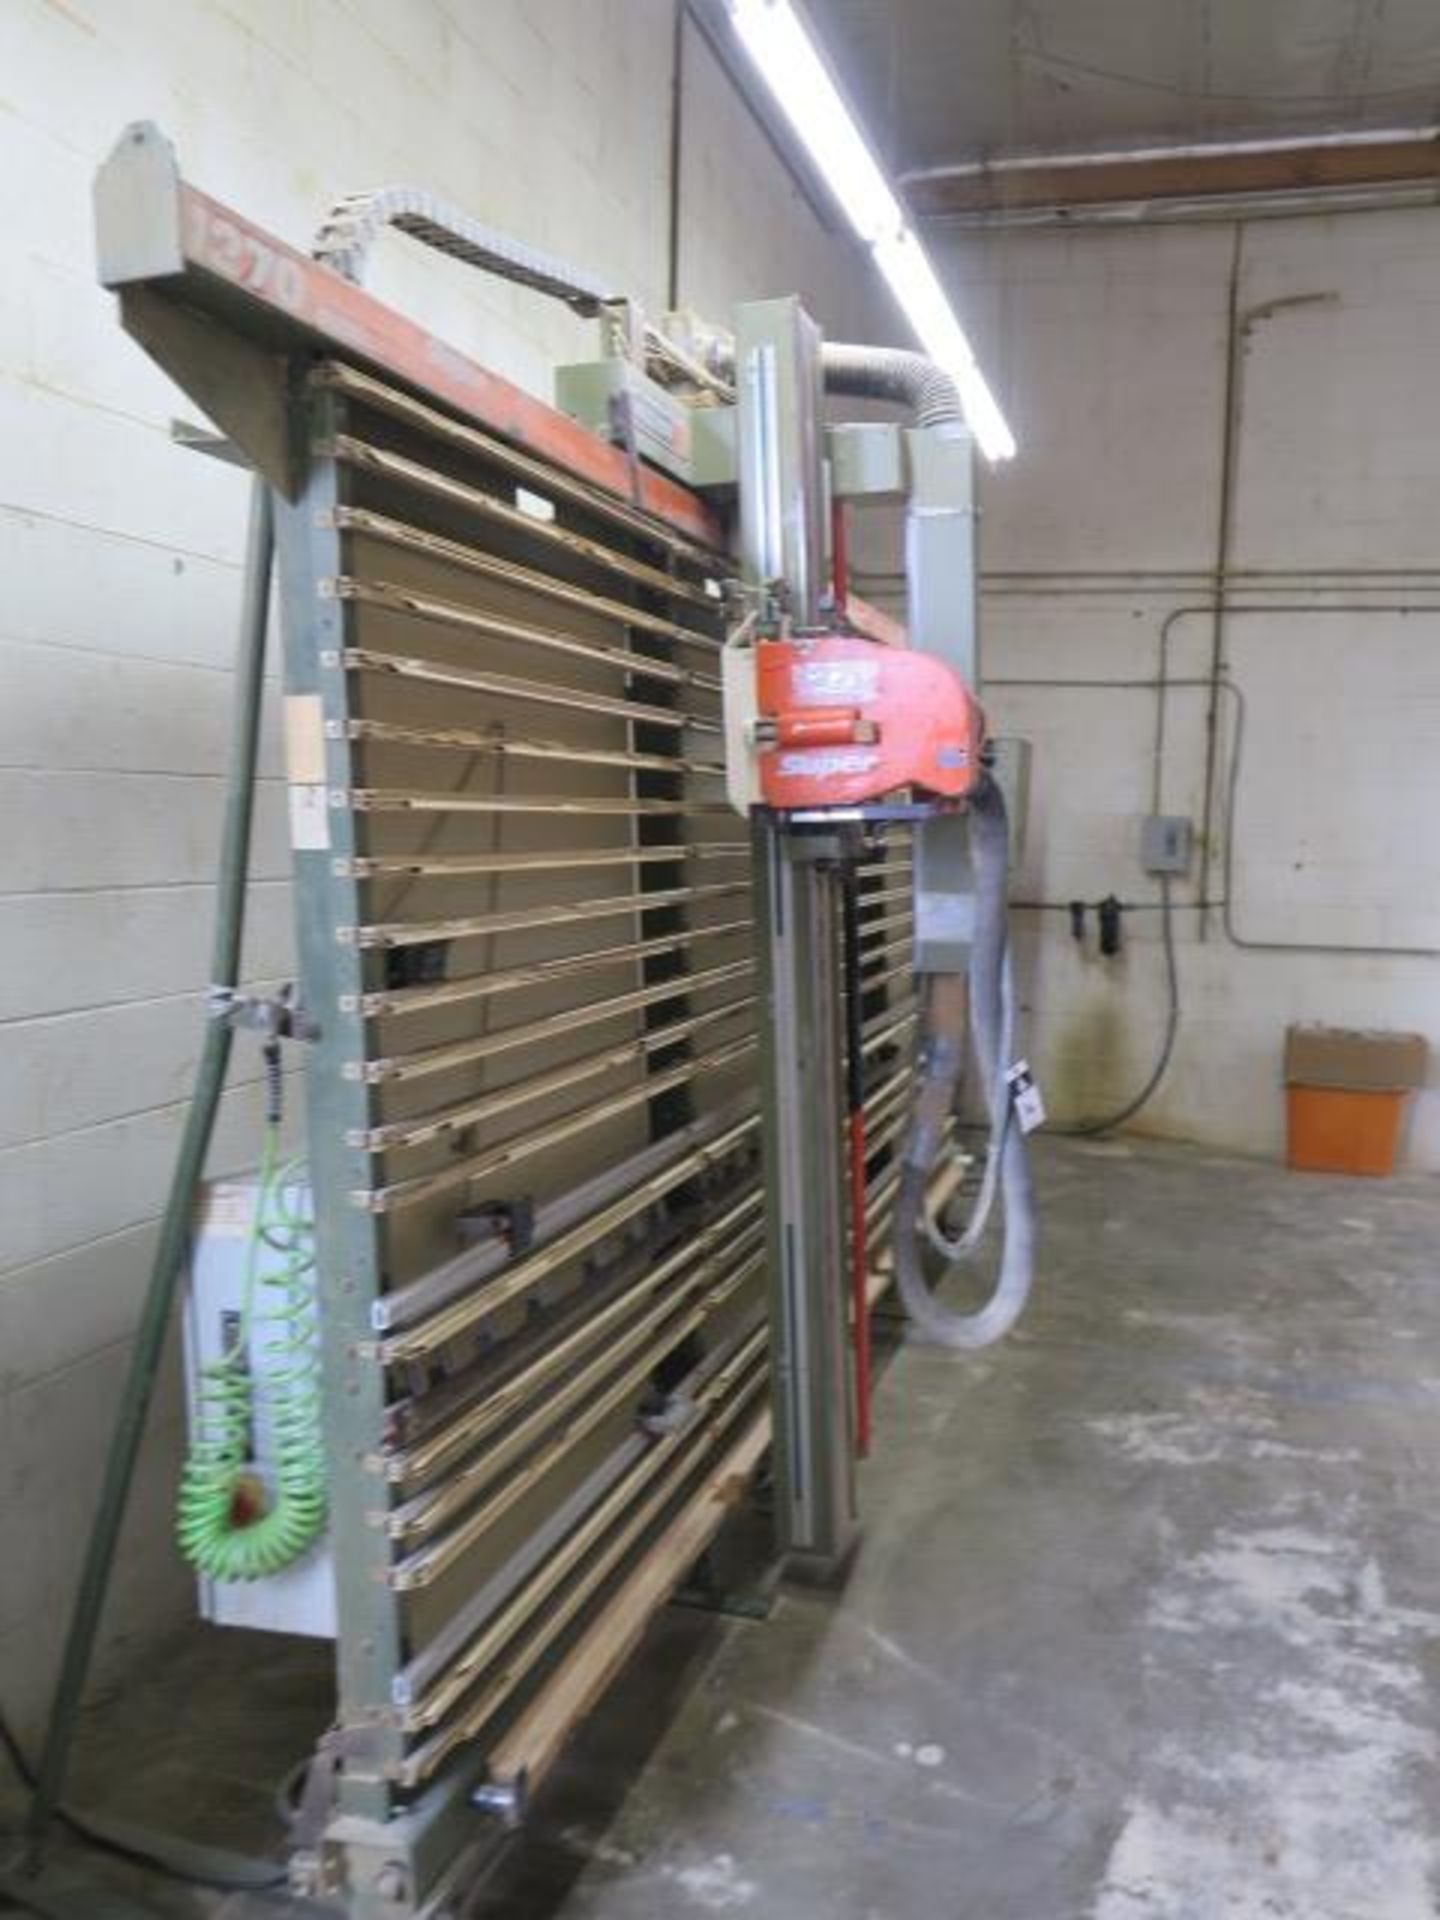 Holz-Her “Super 1270 Automatic” 10’ Vertical Panel Saw s/n 641 (SOLD AS-IS - NO WARRANTY) - Image 2 of 11